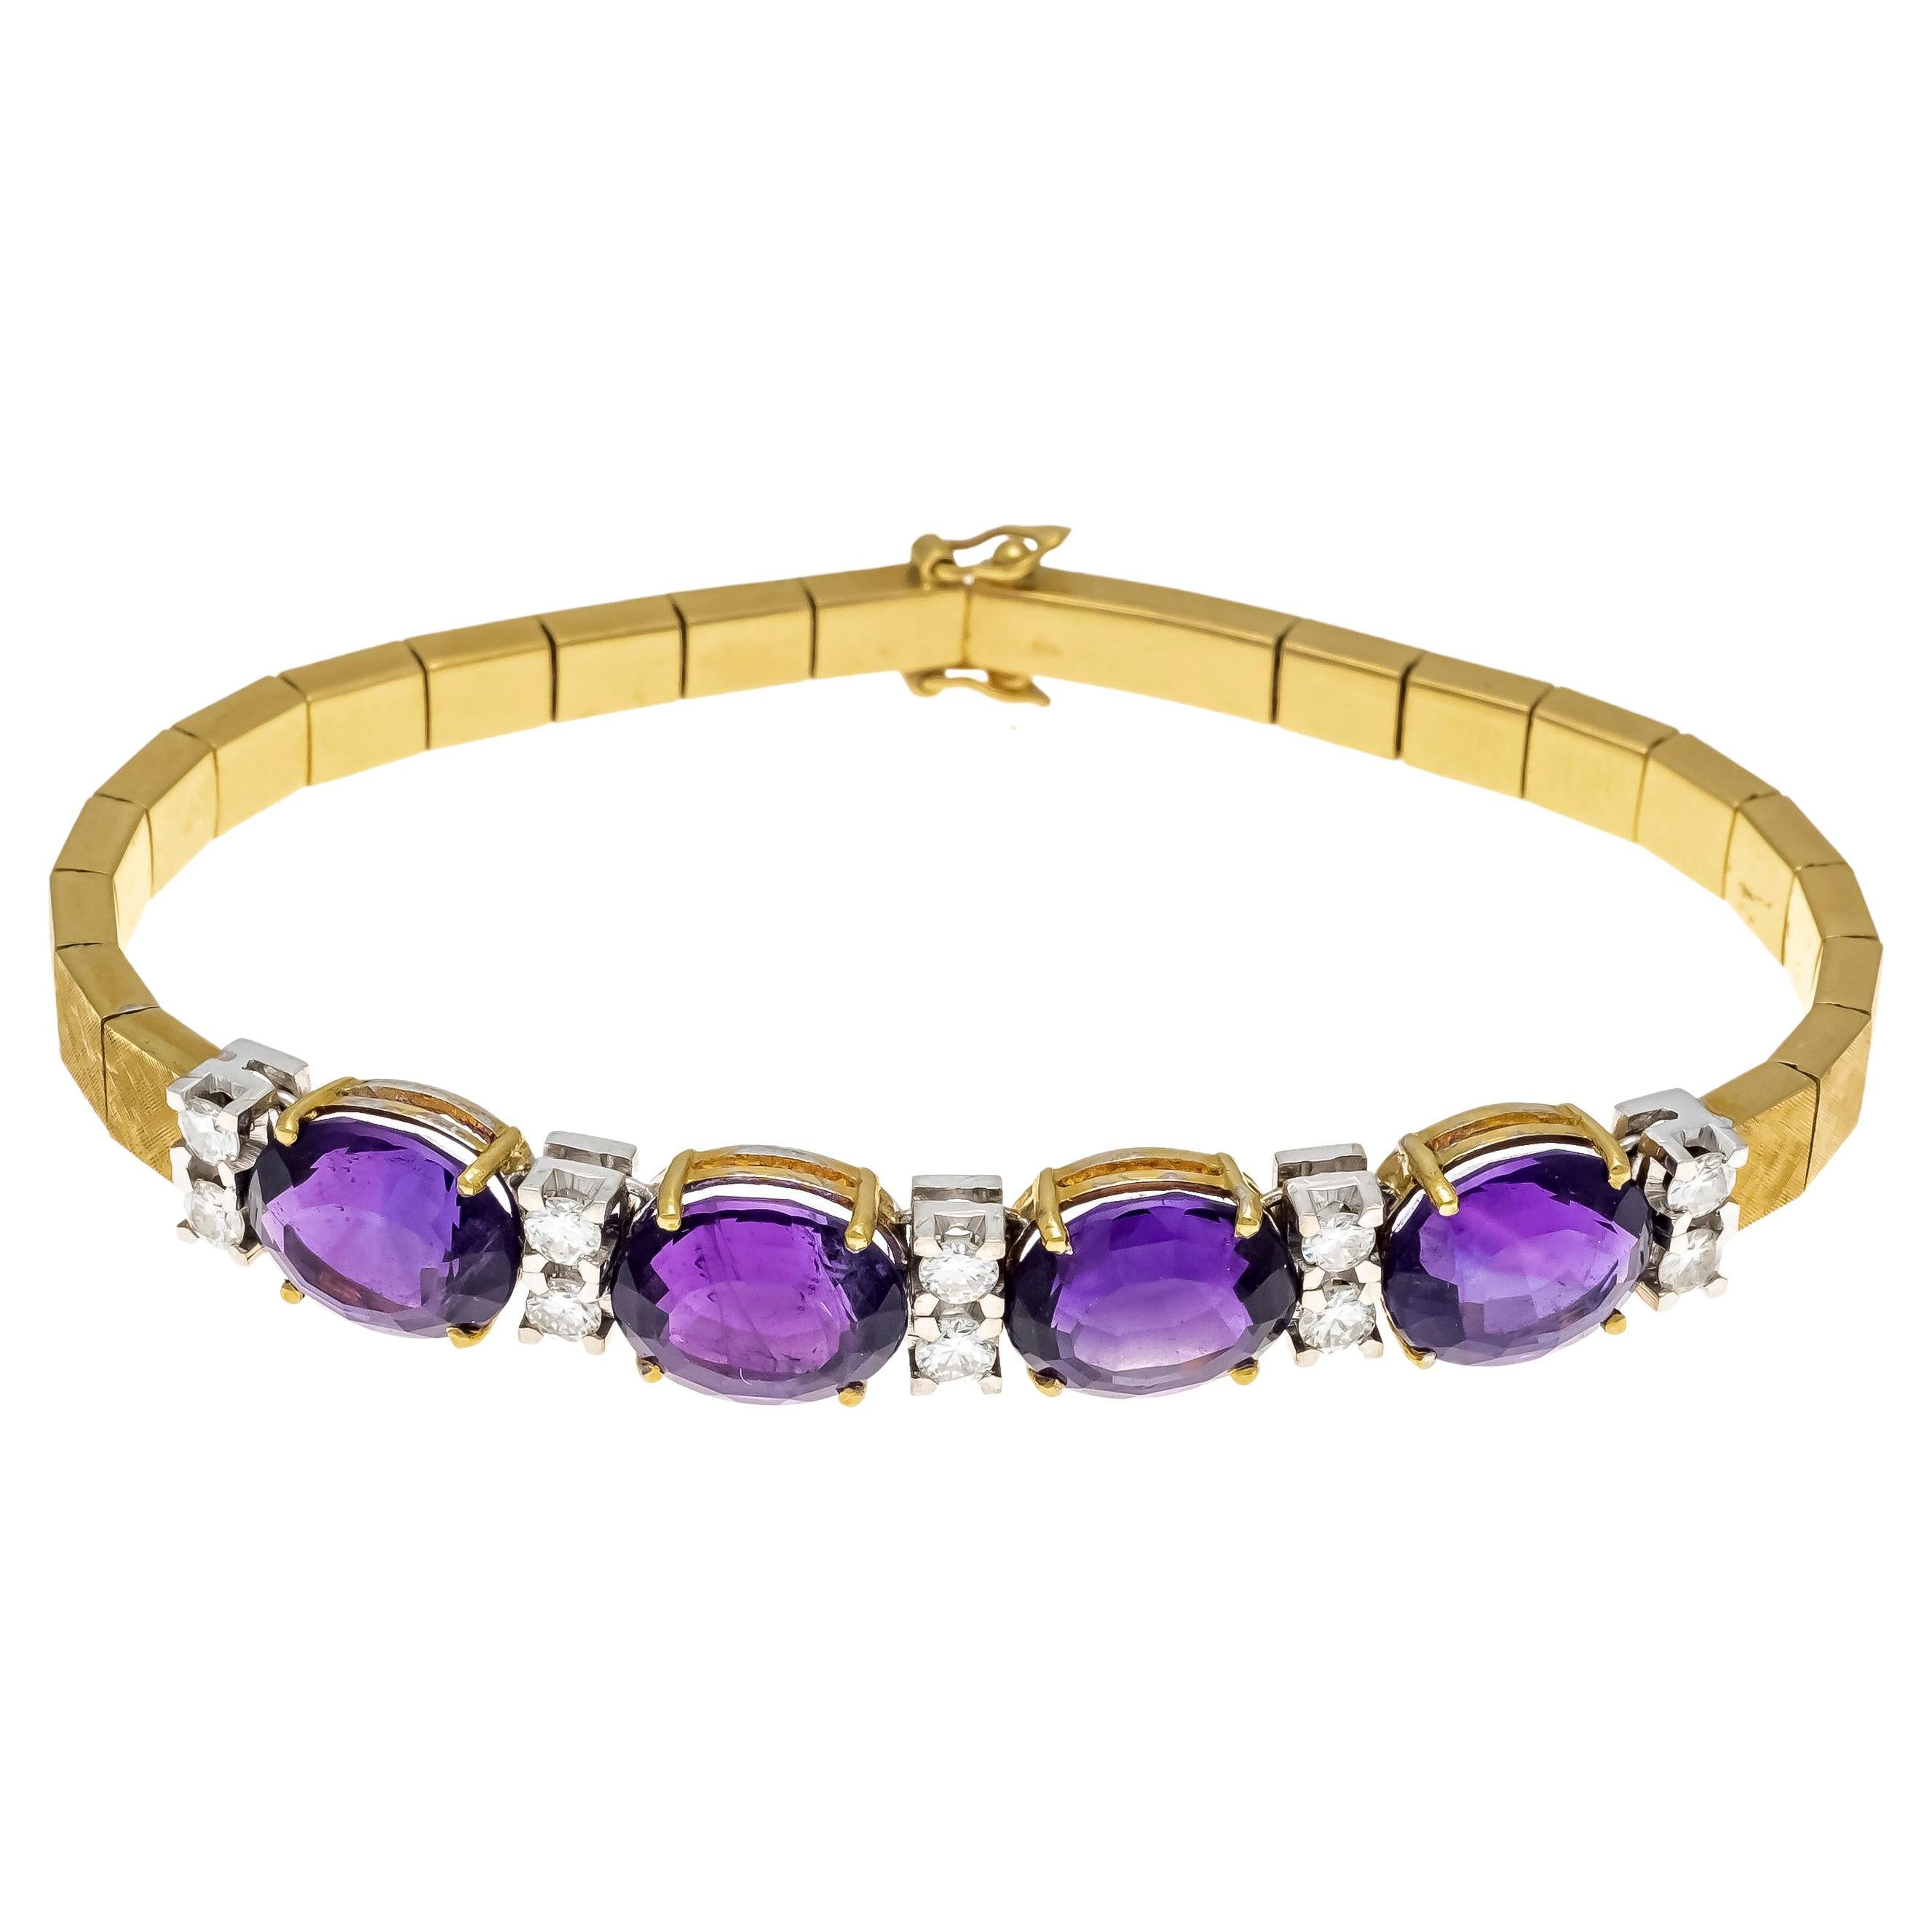 Noble Amethyst and Diamond Bracelet, 18k Yellow Gold and White Gold